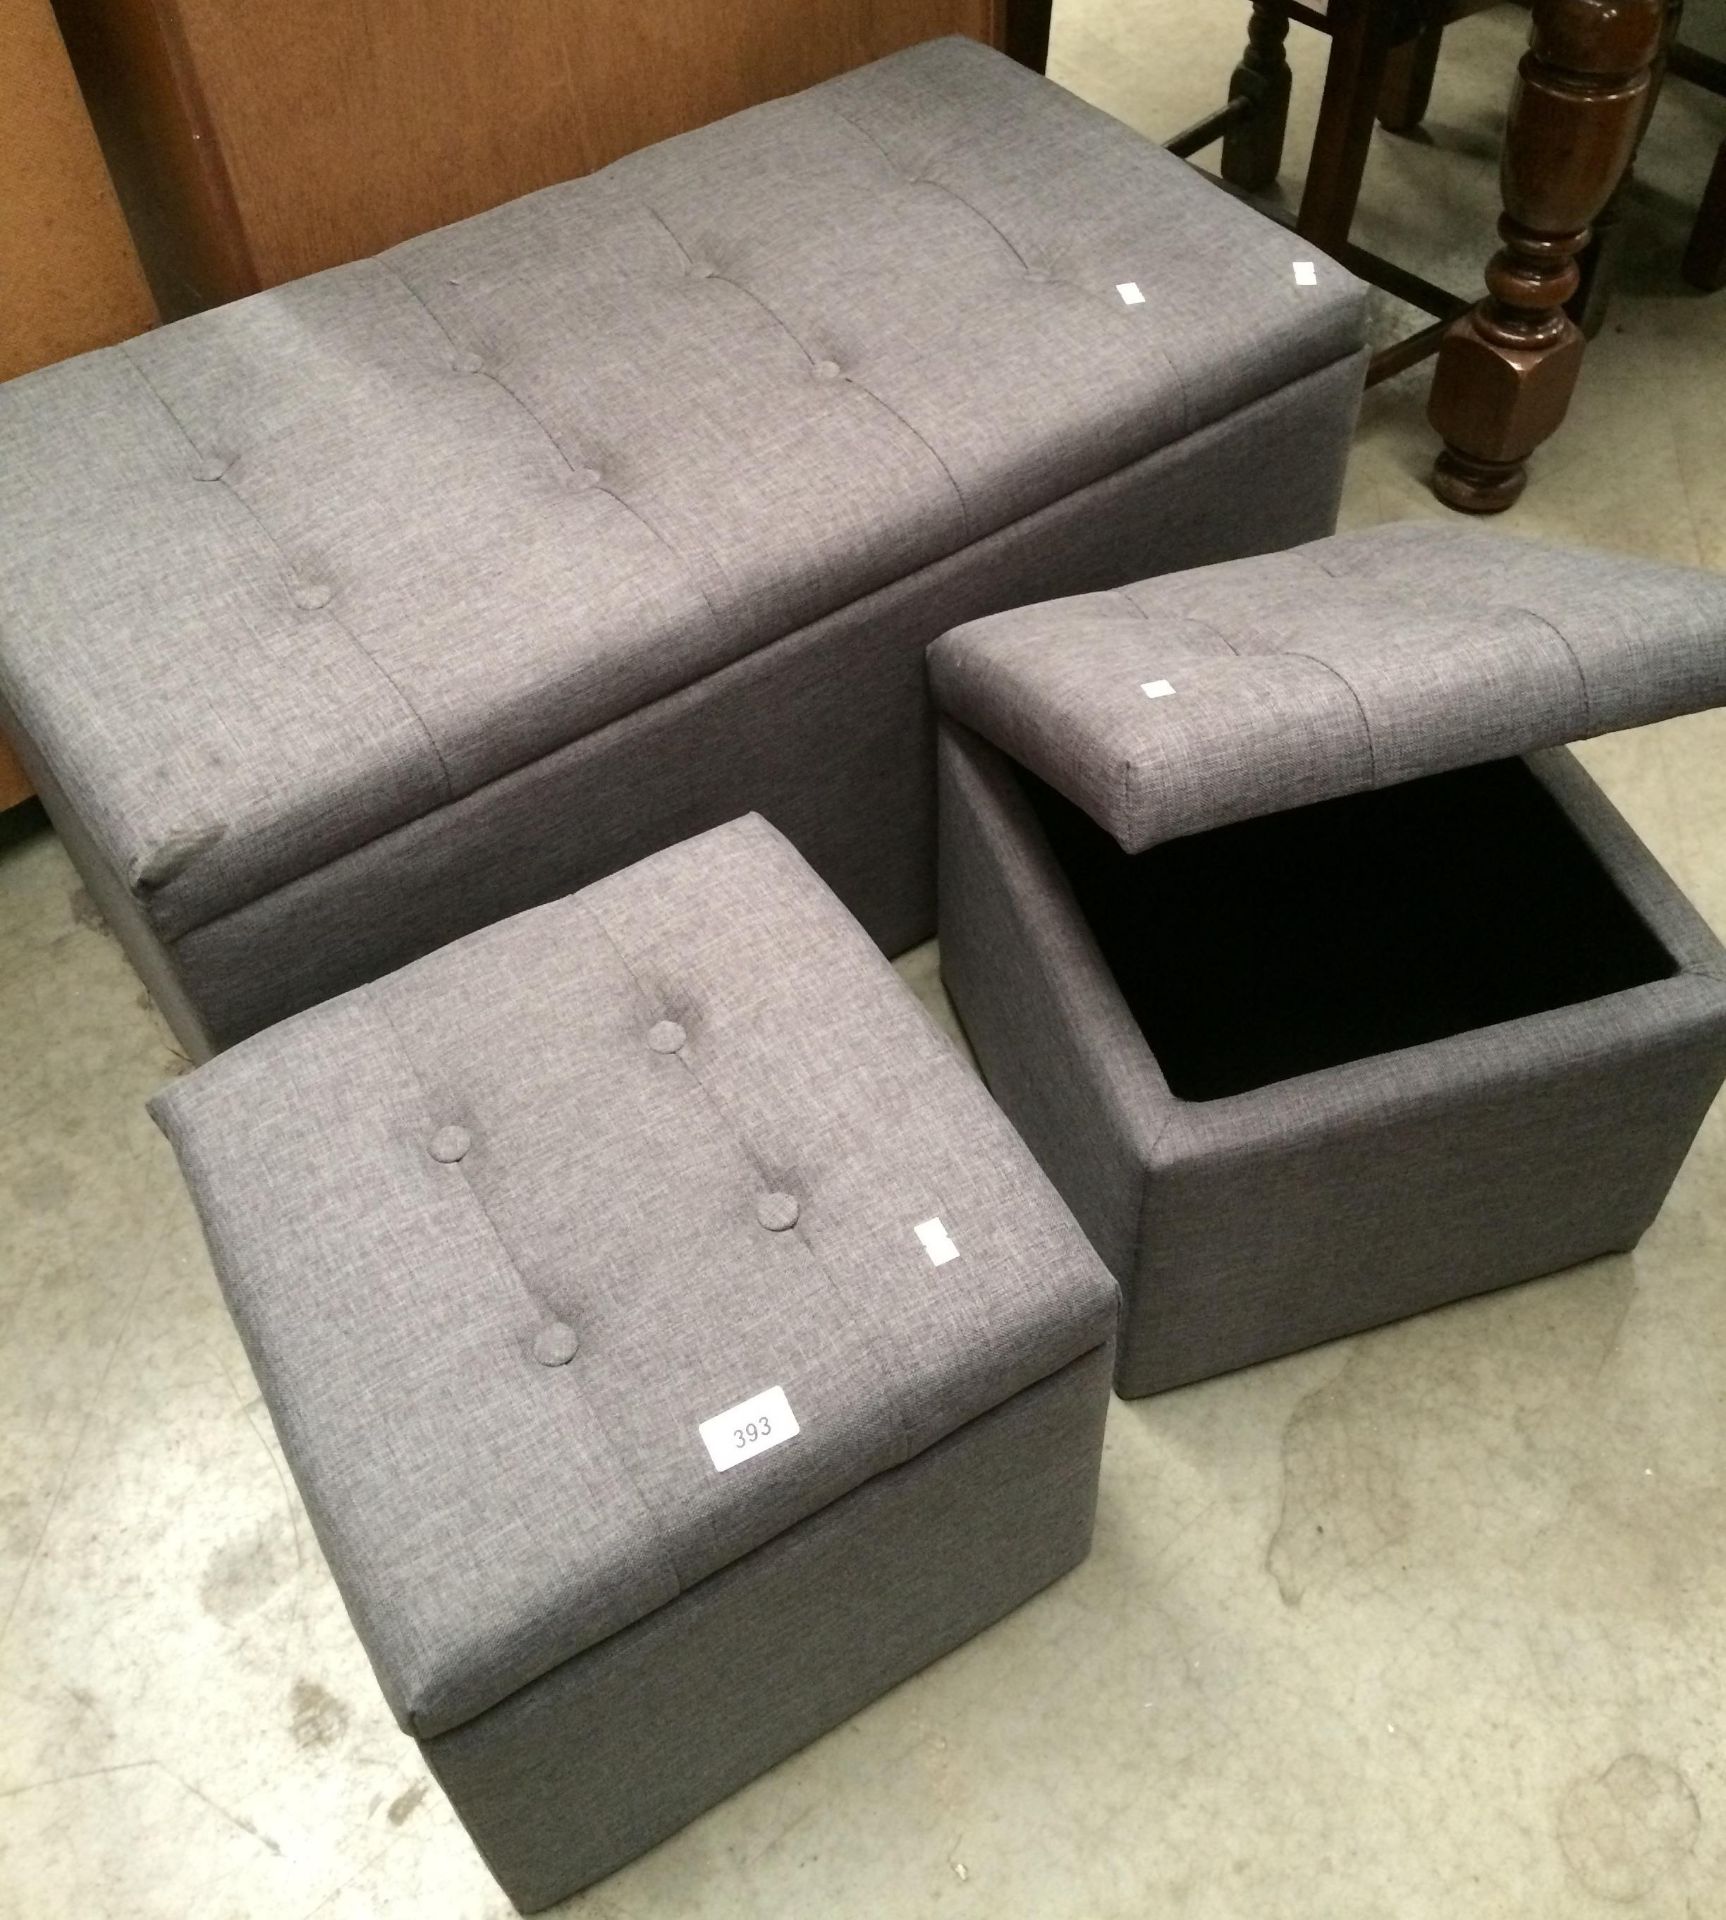 A grey cloth upholstered Ottoman and two small stools with lift up tops